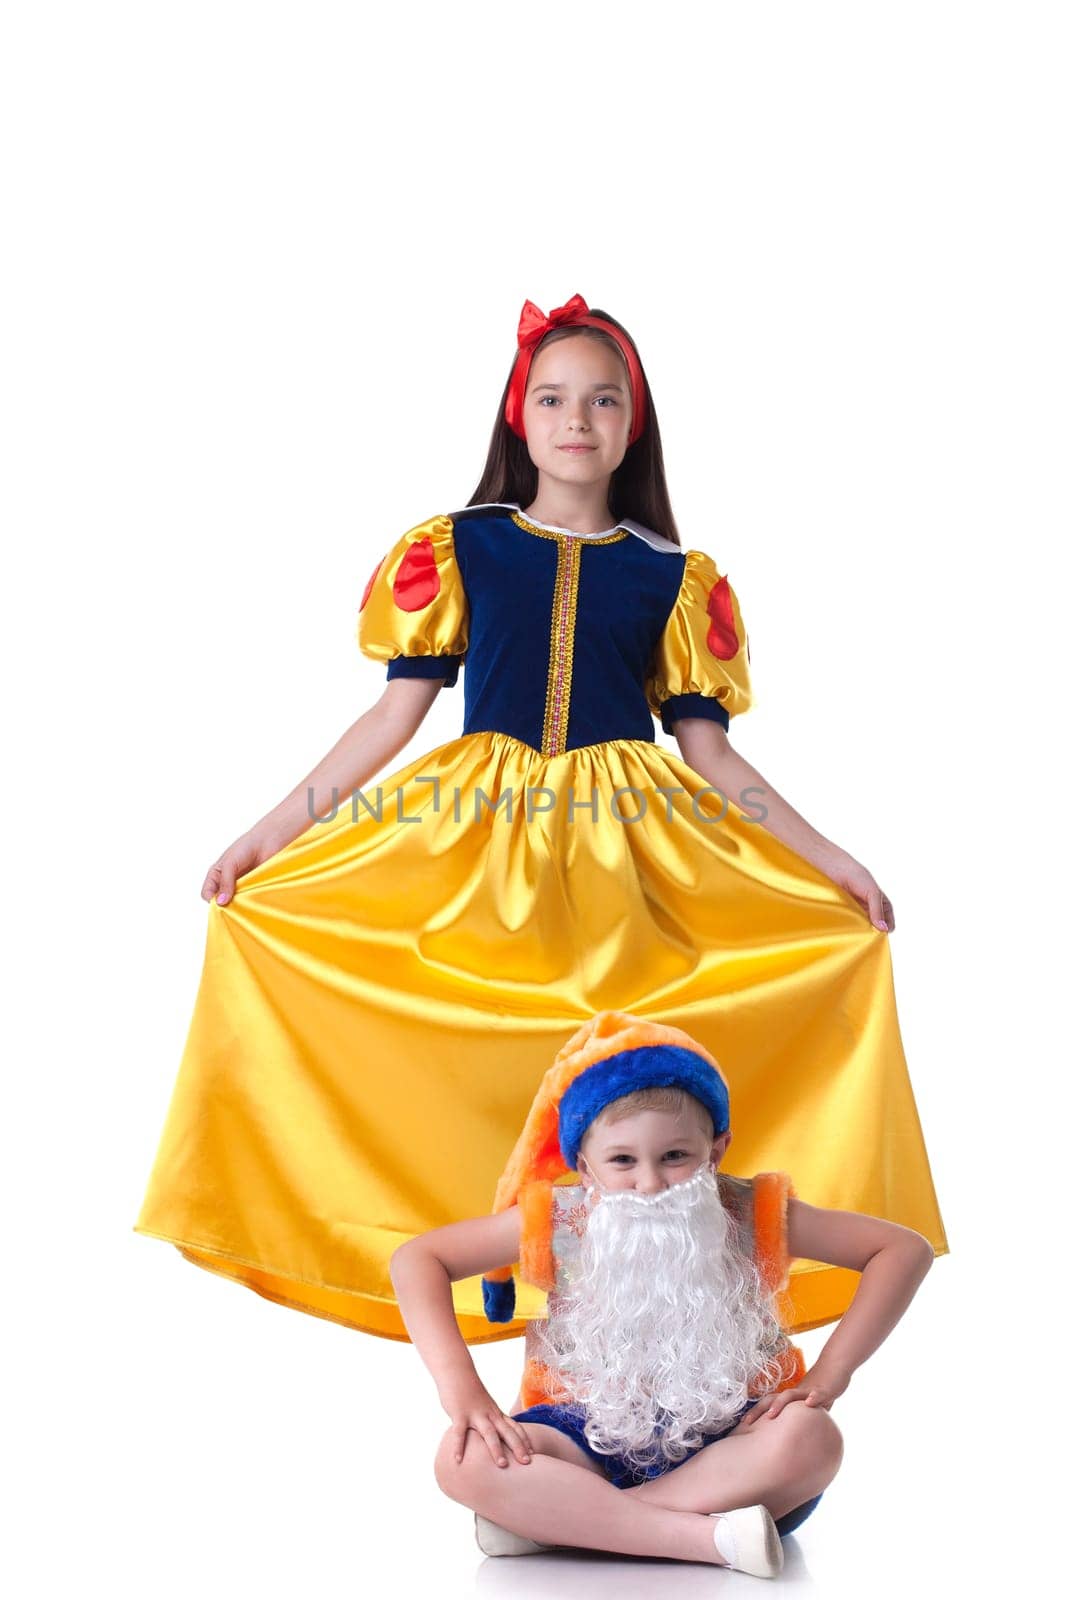 Beautiful Snow White posing with funny gnome by rivertime